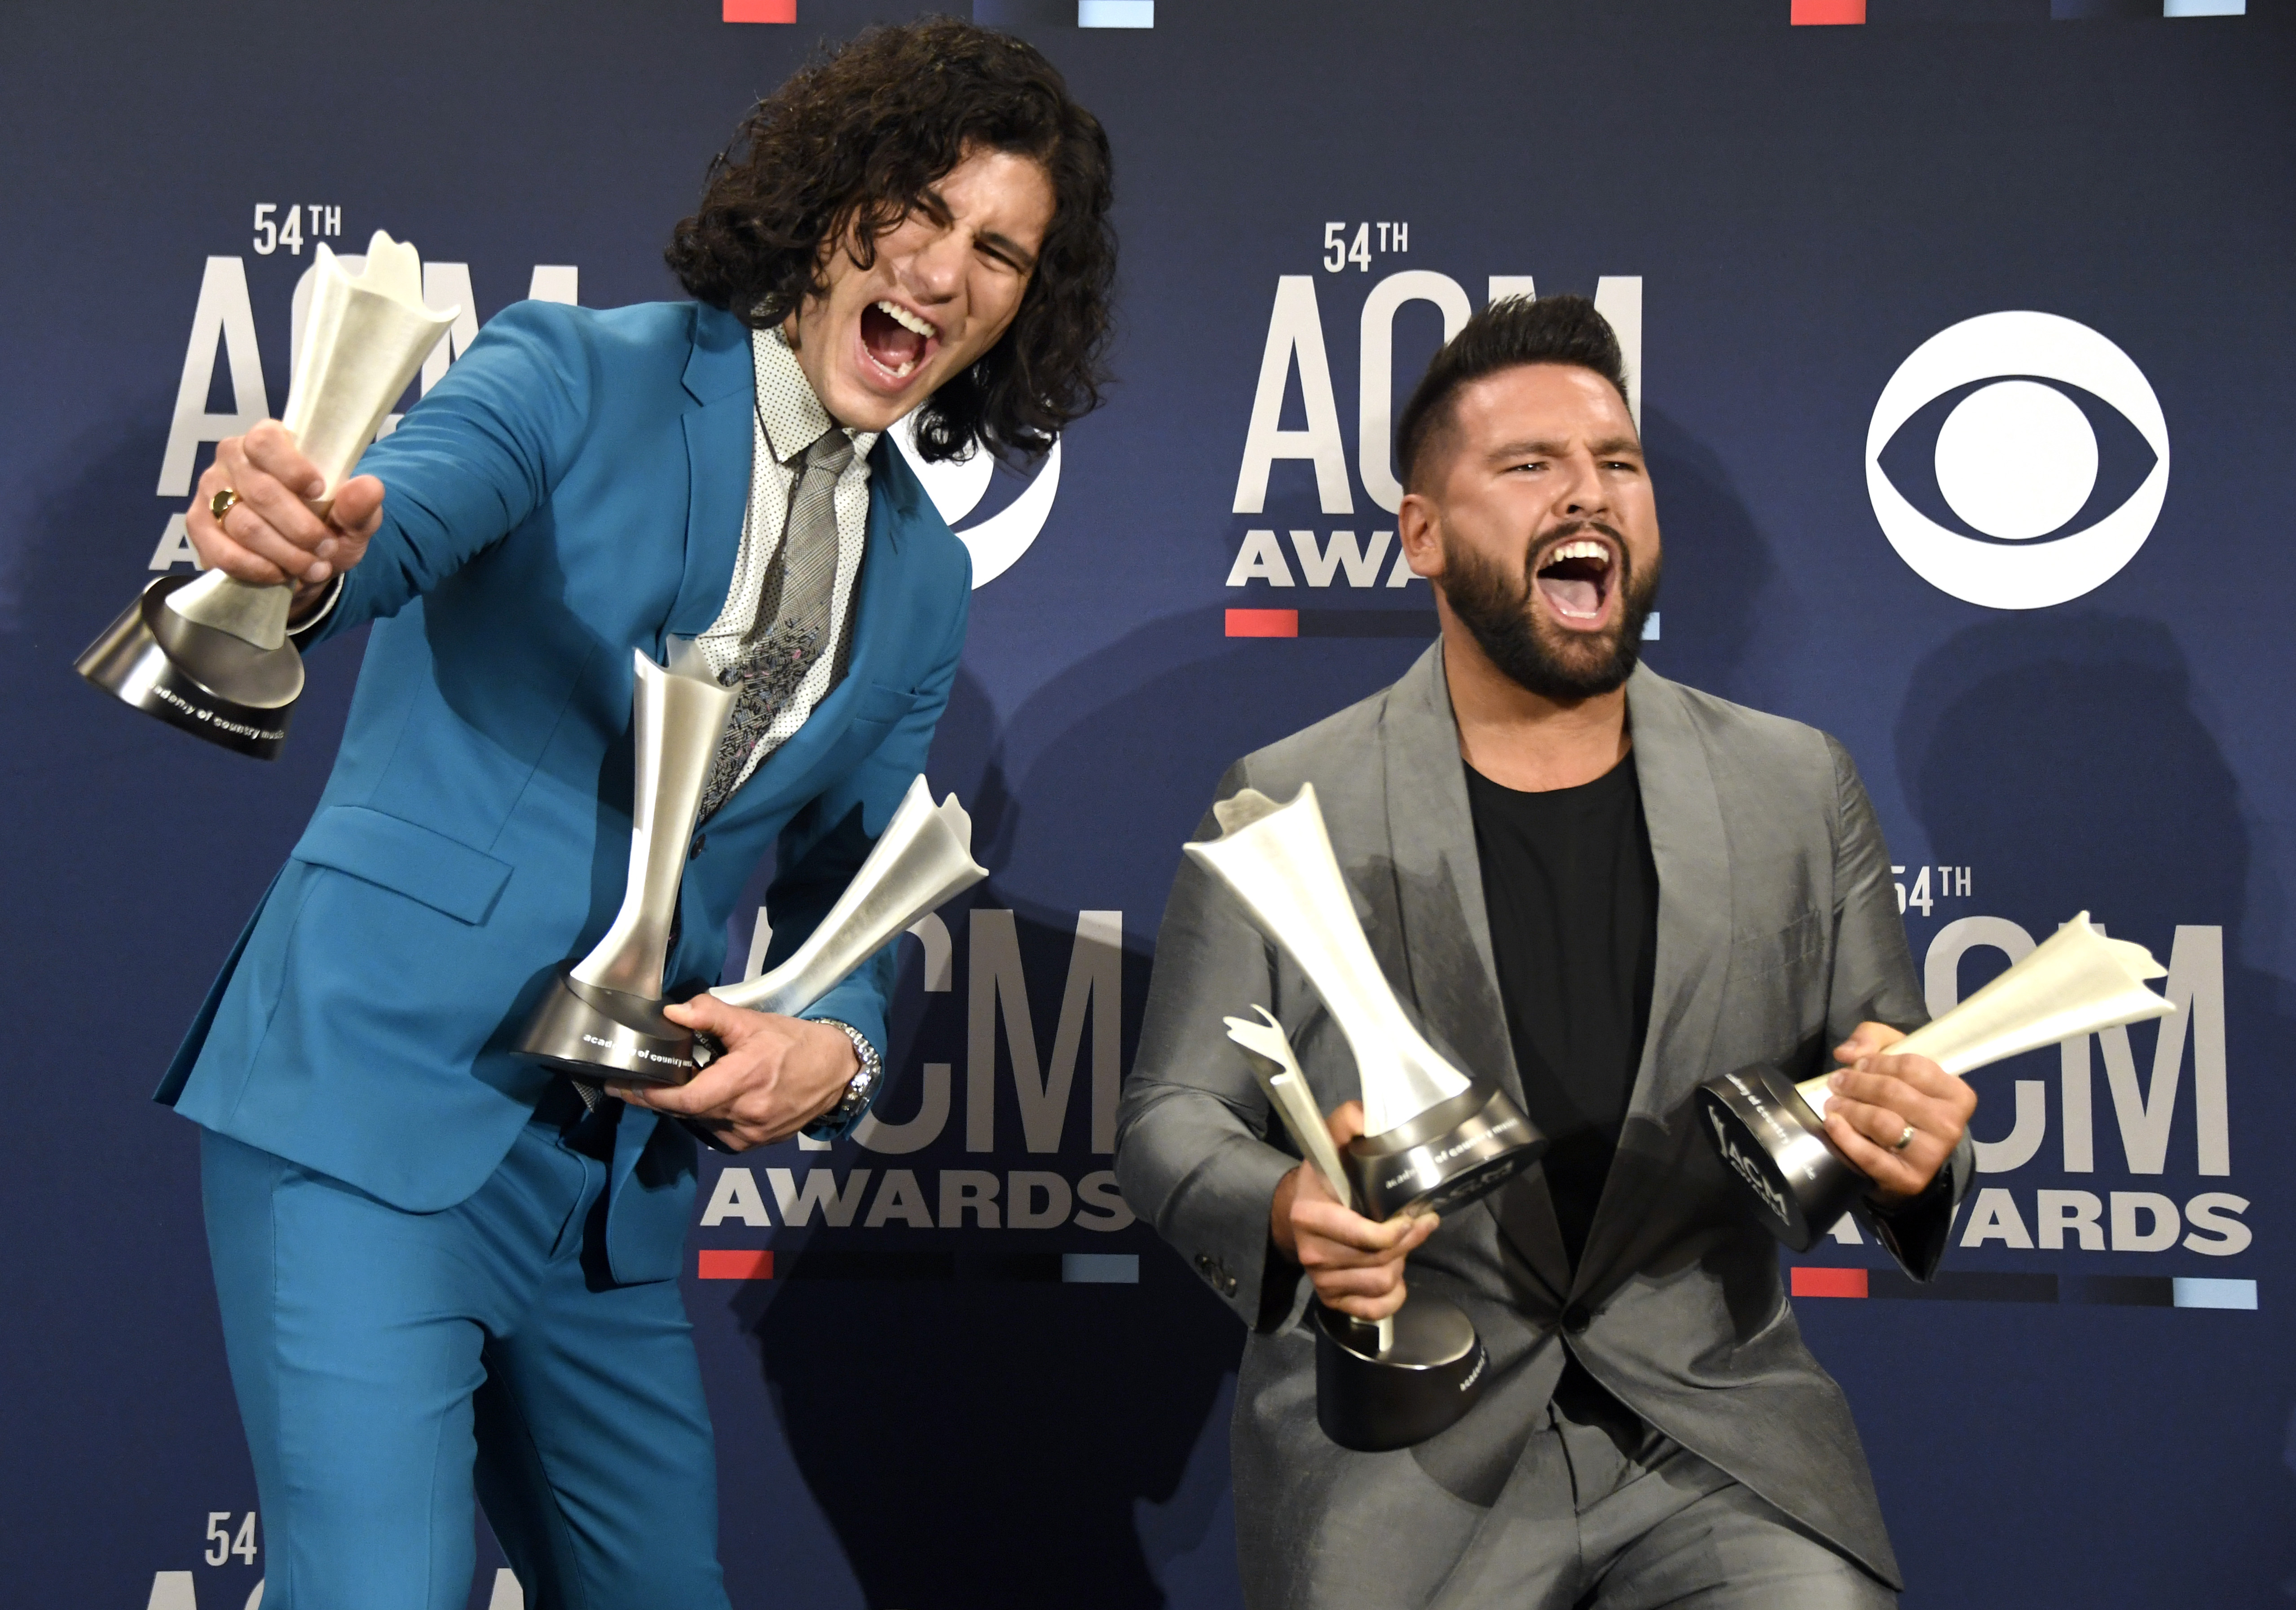 10 of Our Favorite ACM Awards Moments of All Time